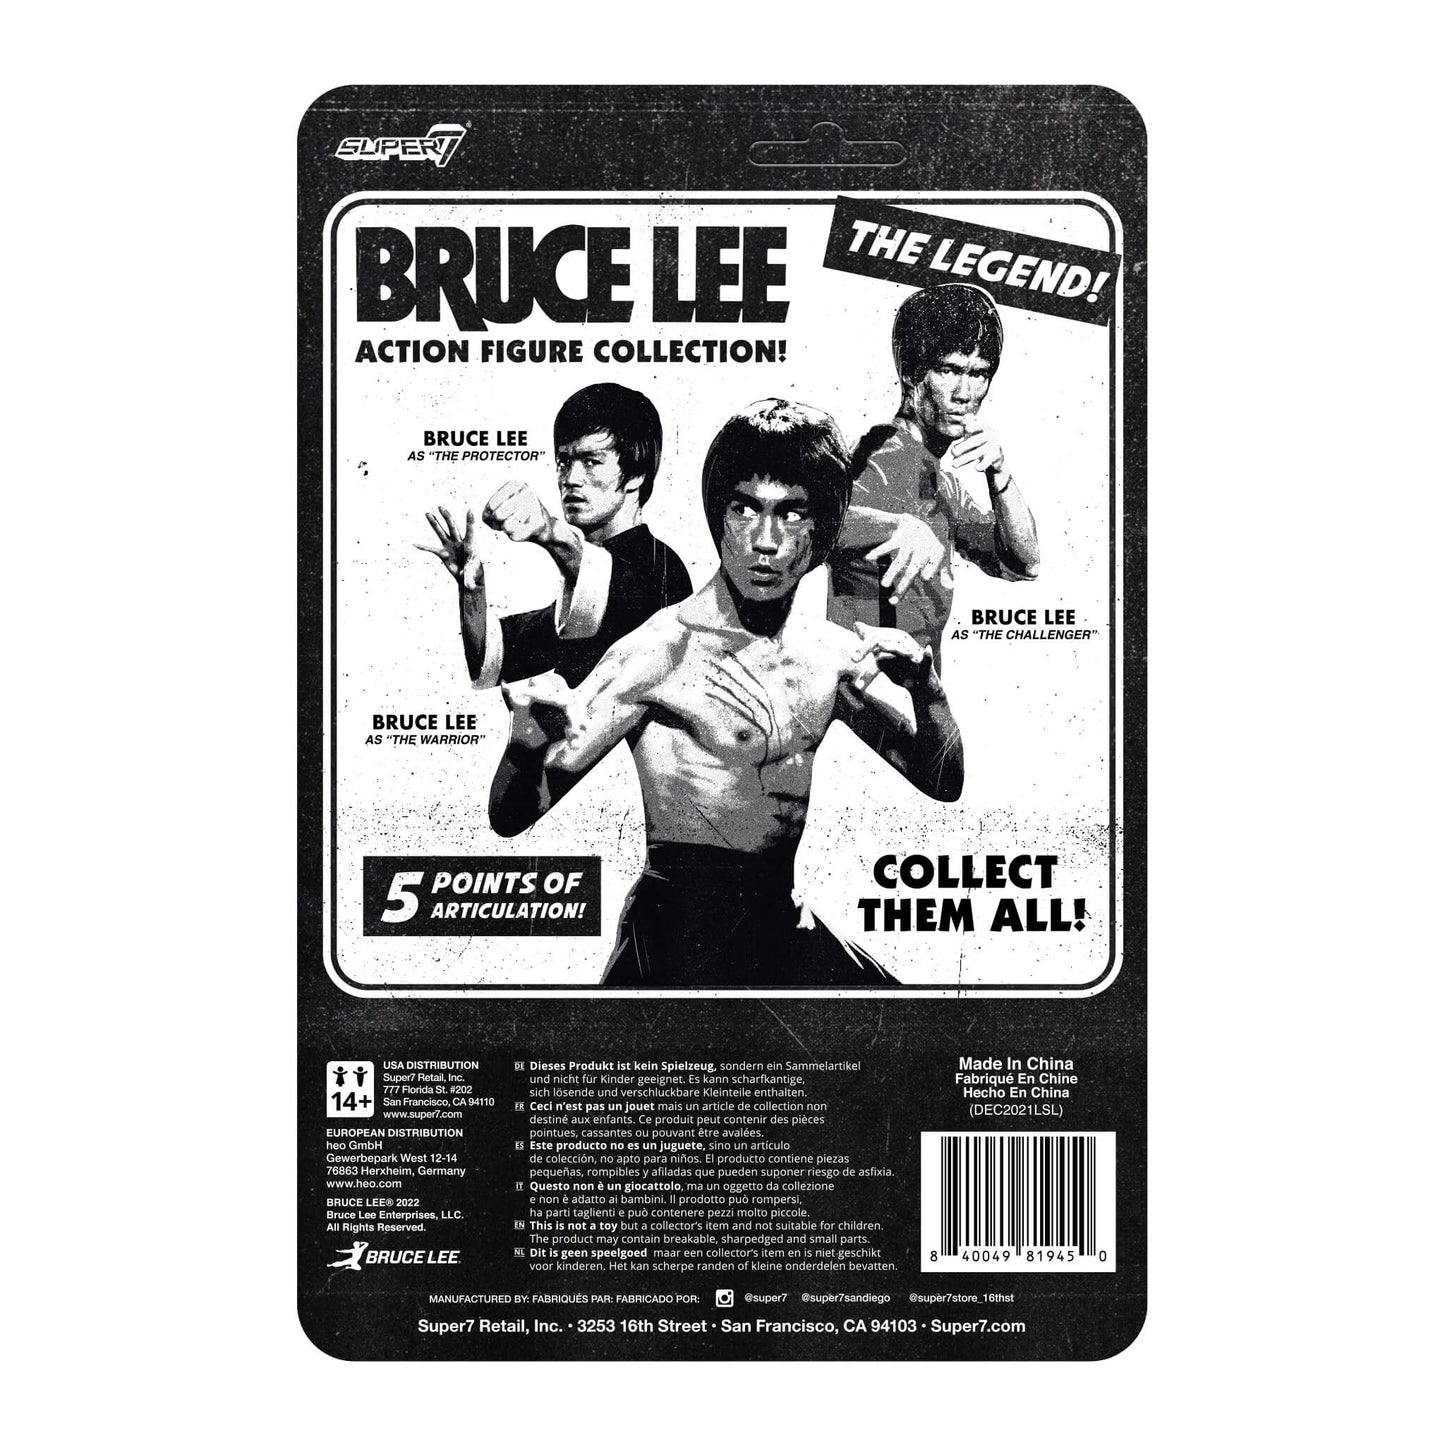 Bruce Lee (The Protector)